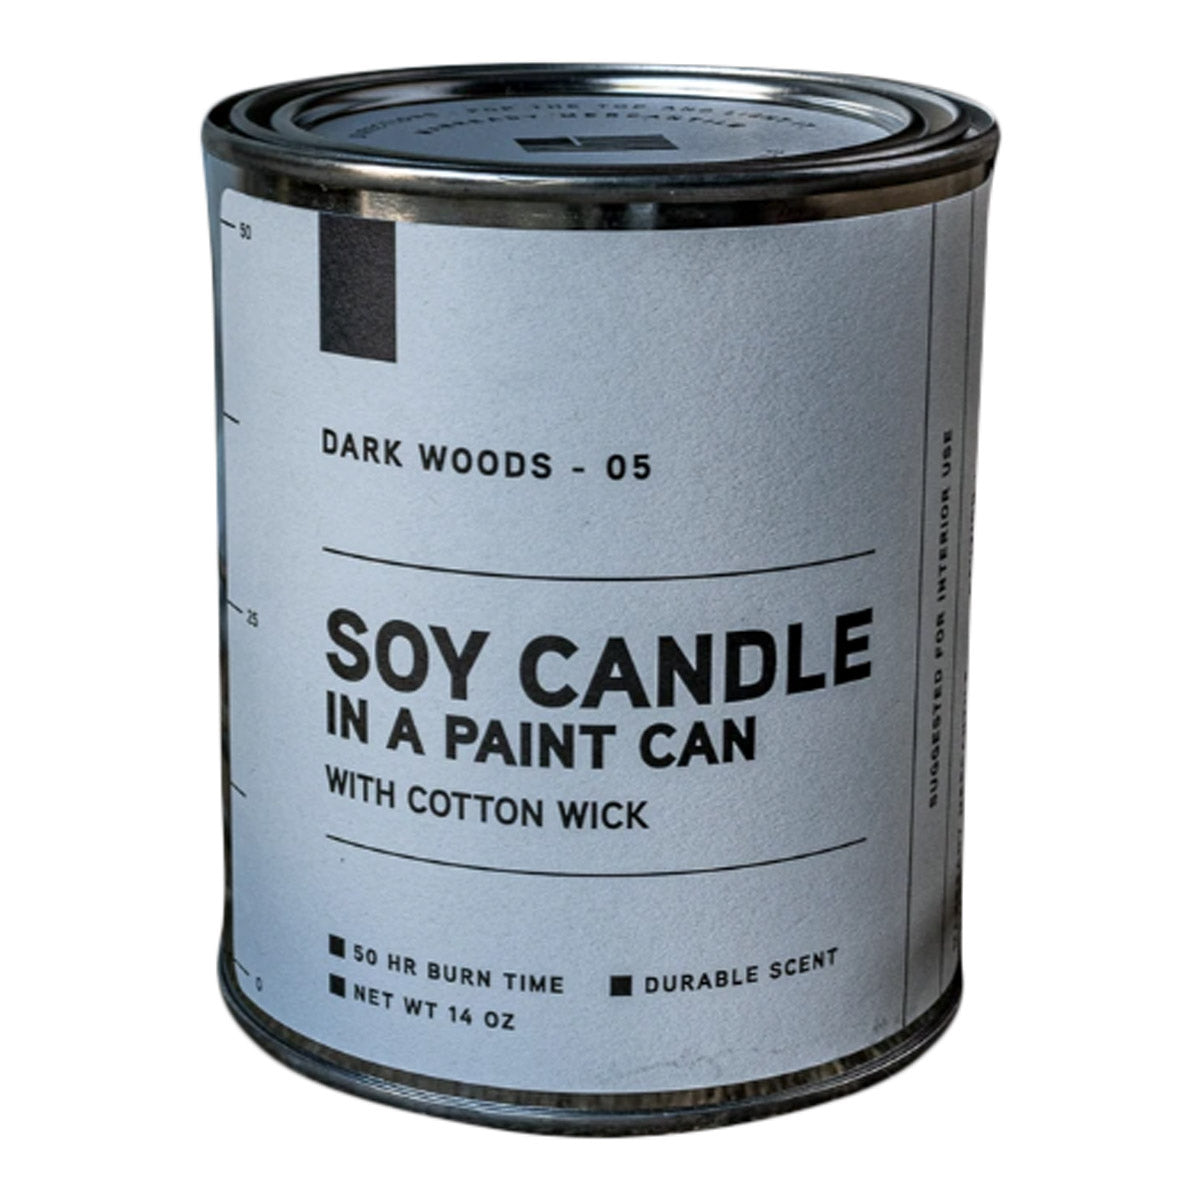 Manready Mercantile Paint Can Soy Candles